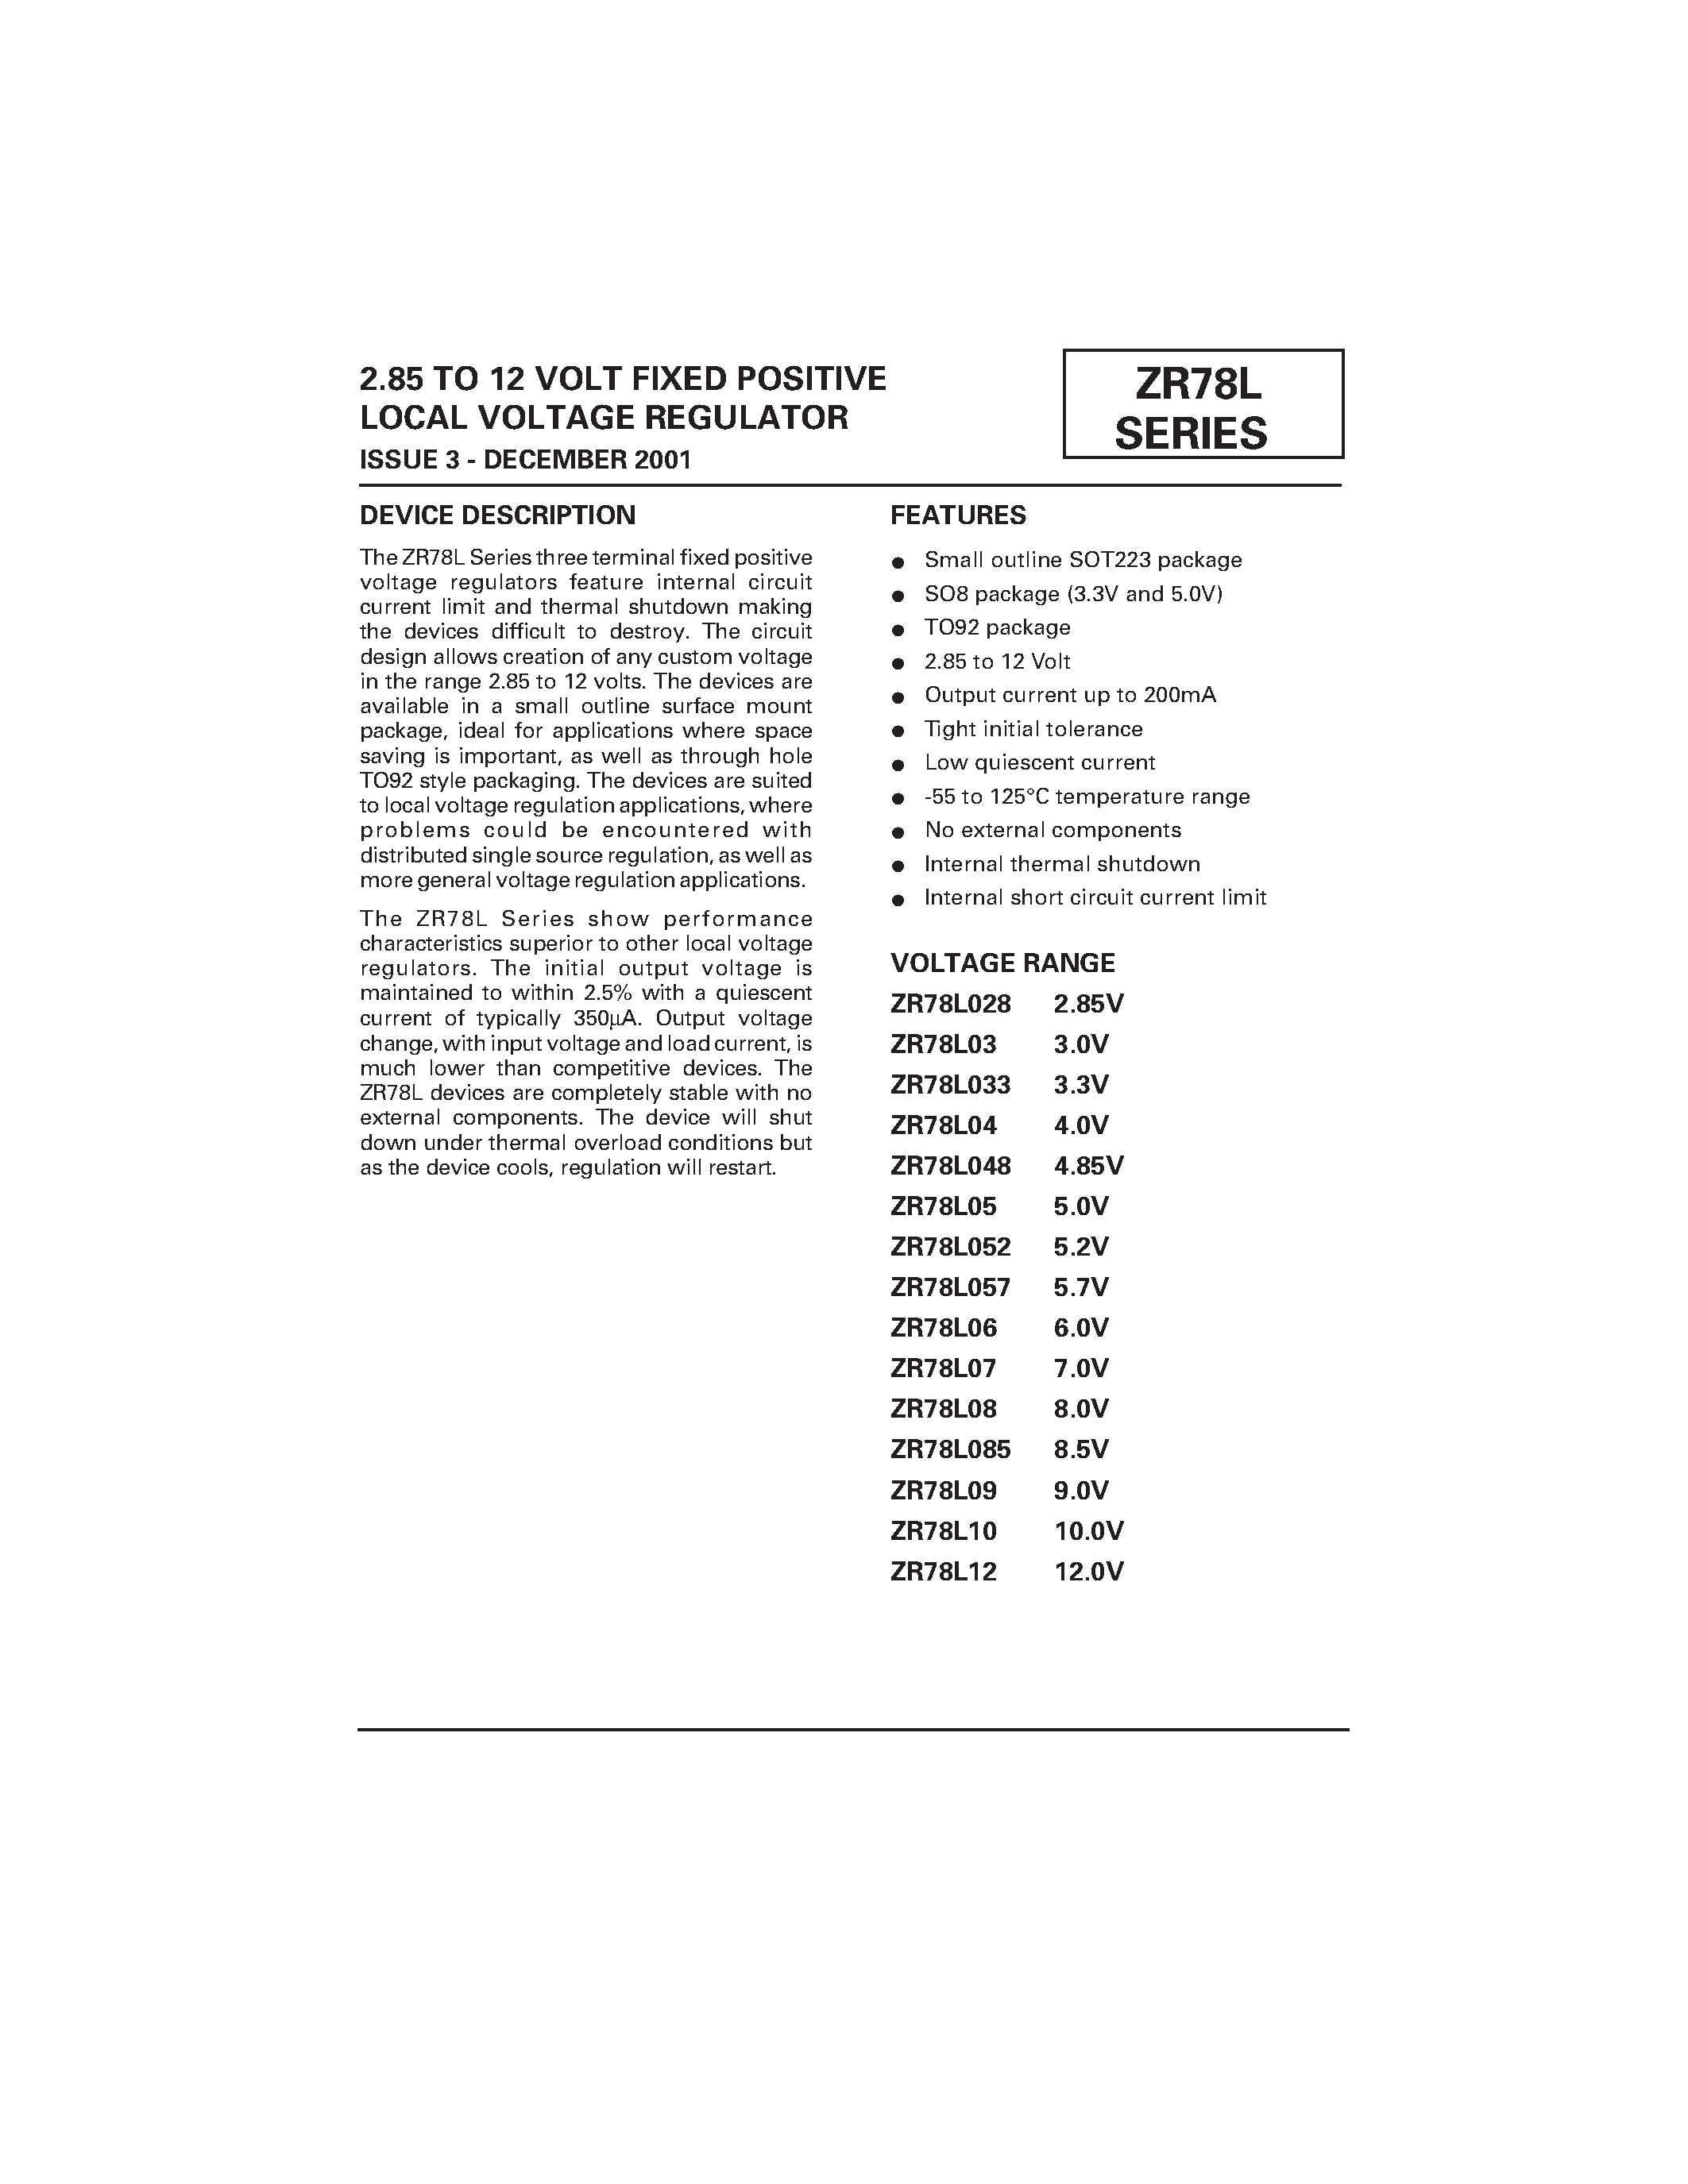 Datasheet ZR78L - 2.85 TO 12 VOLT FIXED POSITIVE LOCAL VOLTAGE REGULATOR page 1